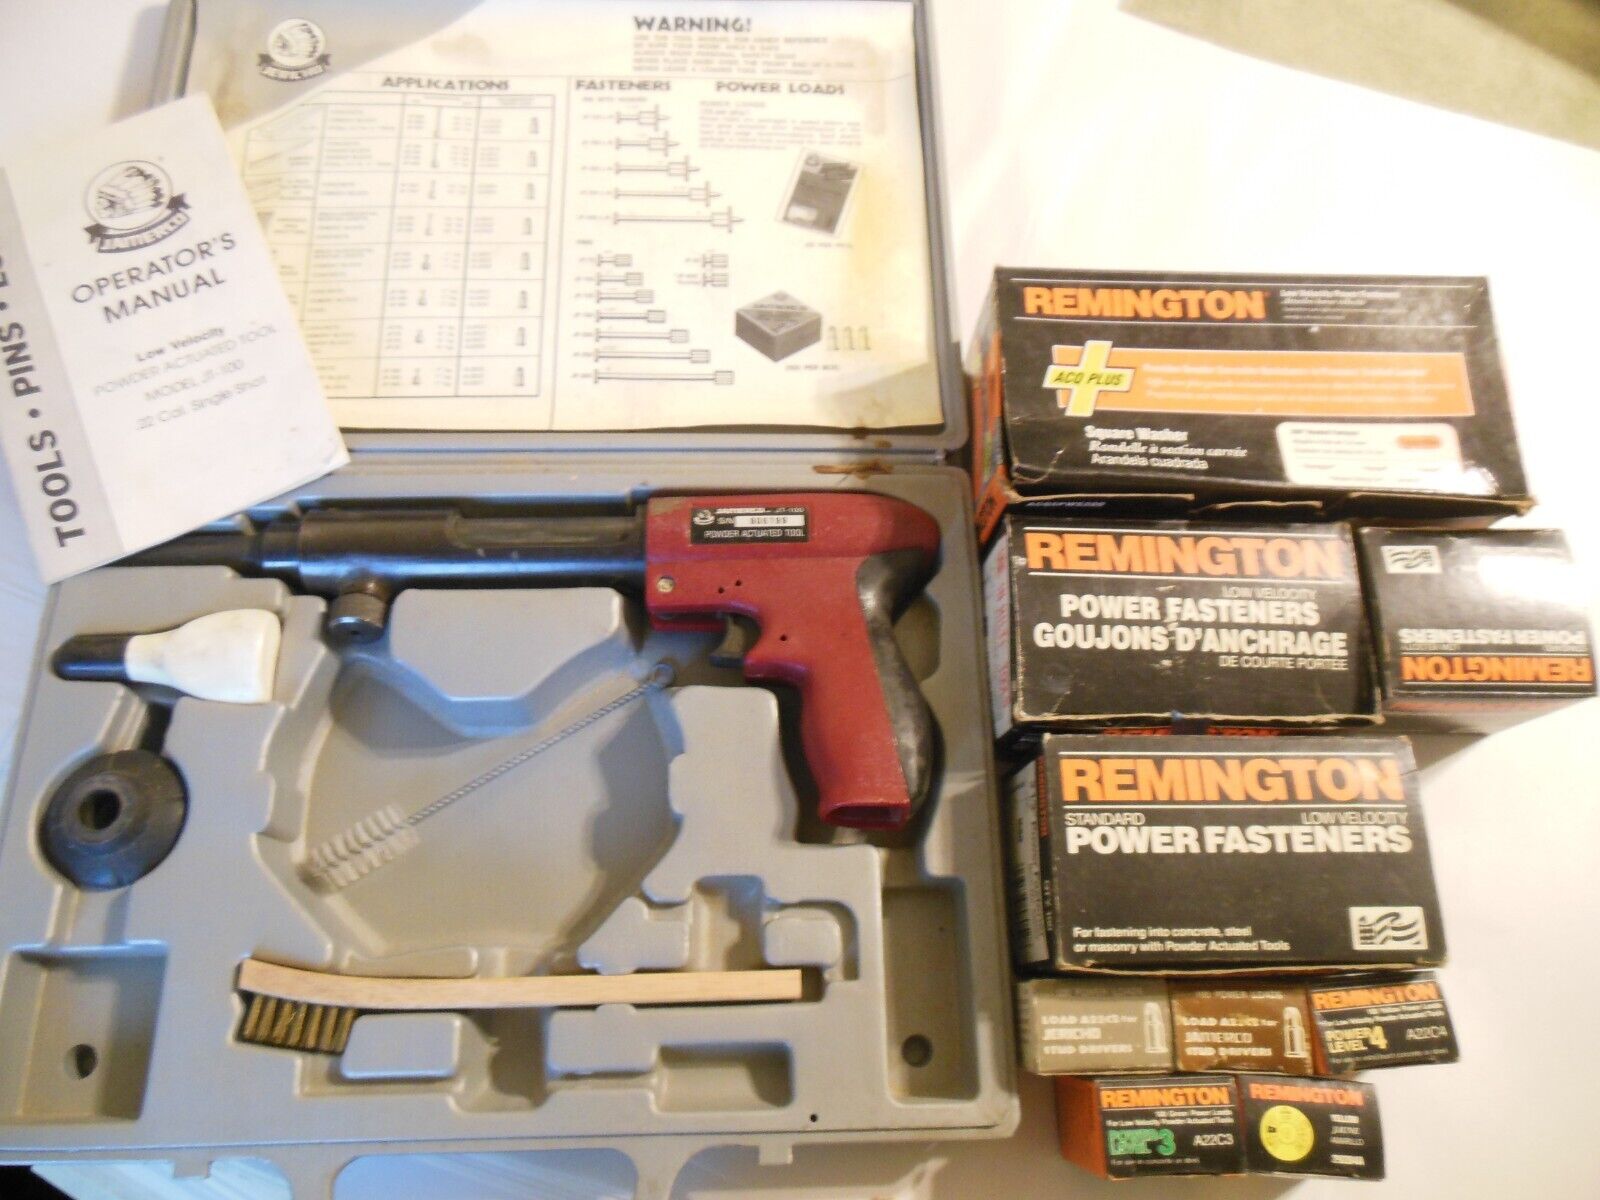 Jamerco Jt-100 Low Velocity Power Actuated Tool With Manual